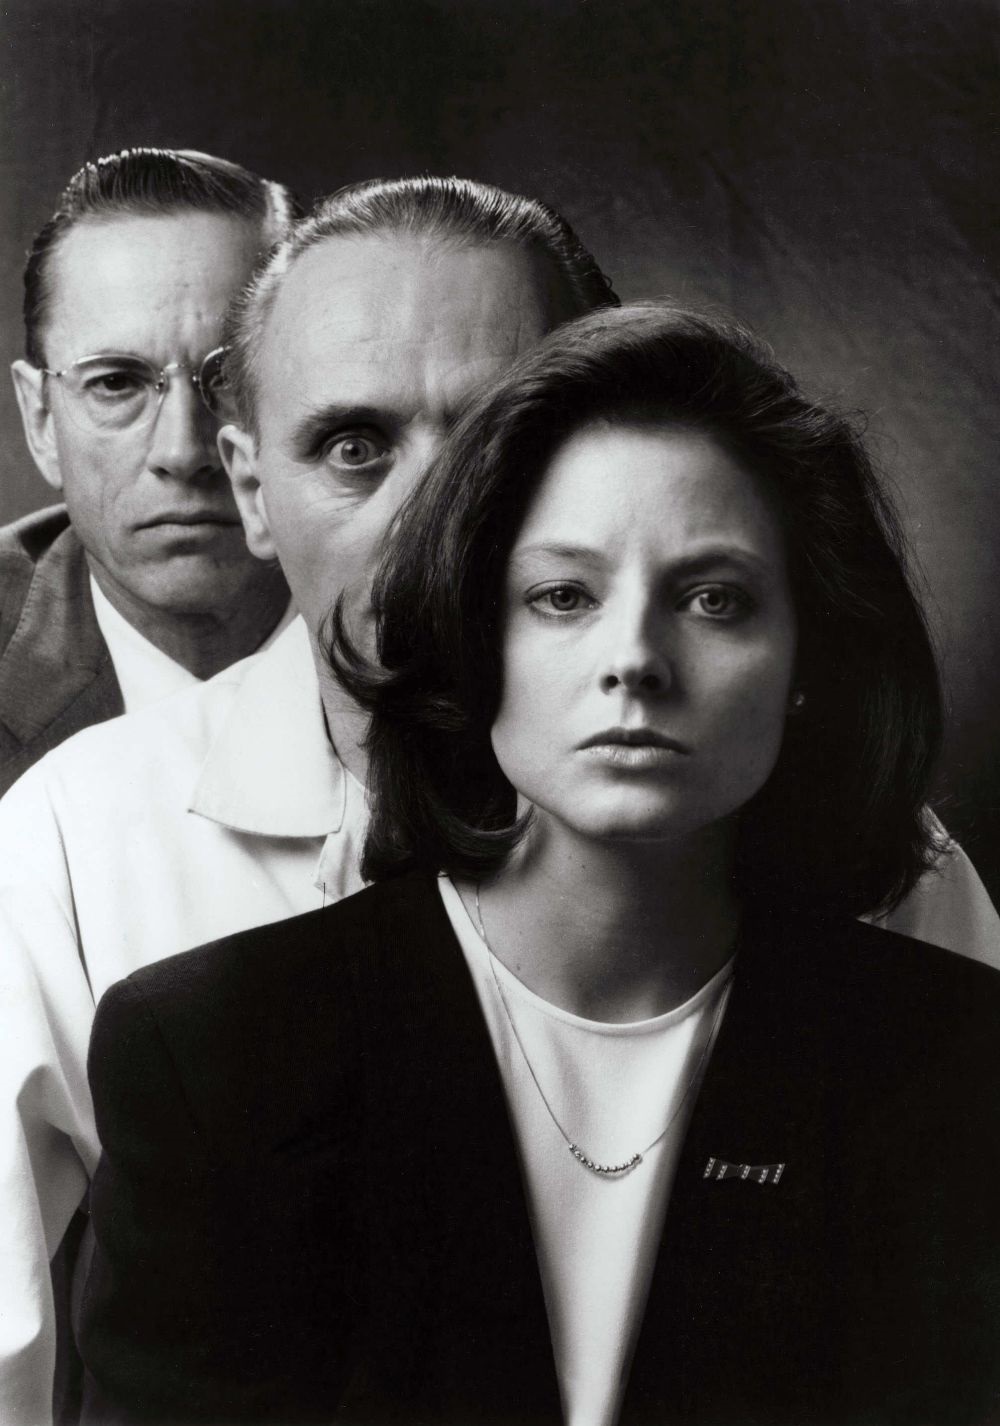 The Silence Of The Lambs Picture